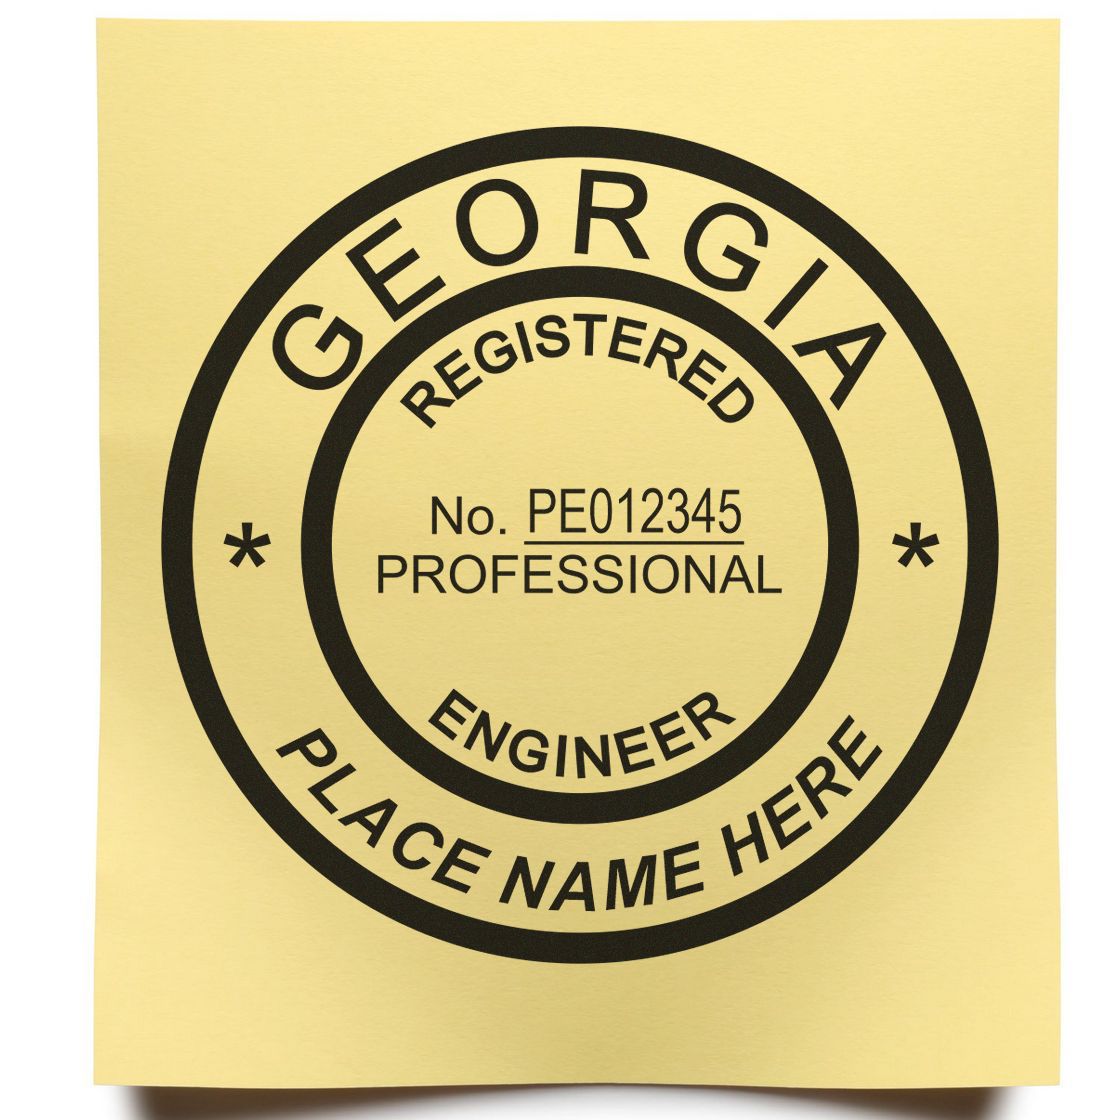 A stamped impression of the Slim Pre-Inked Georgia Professional Engineer Seal Stamp in this stylish lifestyle photo, setting the tone for a unique and personalized product.